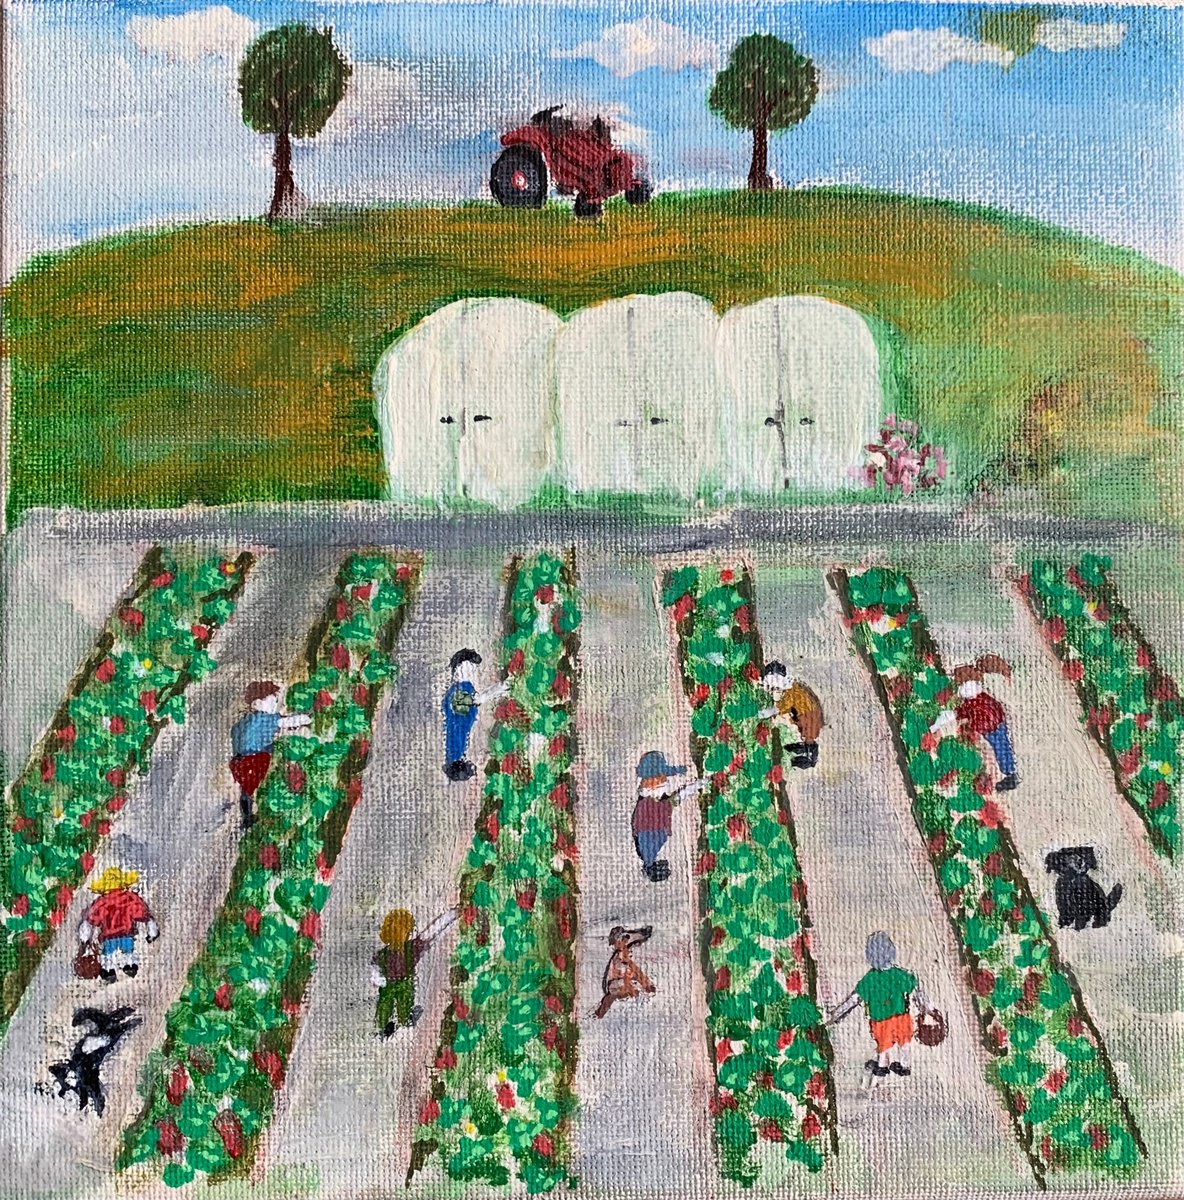 Strawberry picking on the farm by Paul Simon Hughes